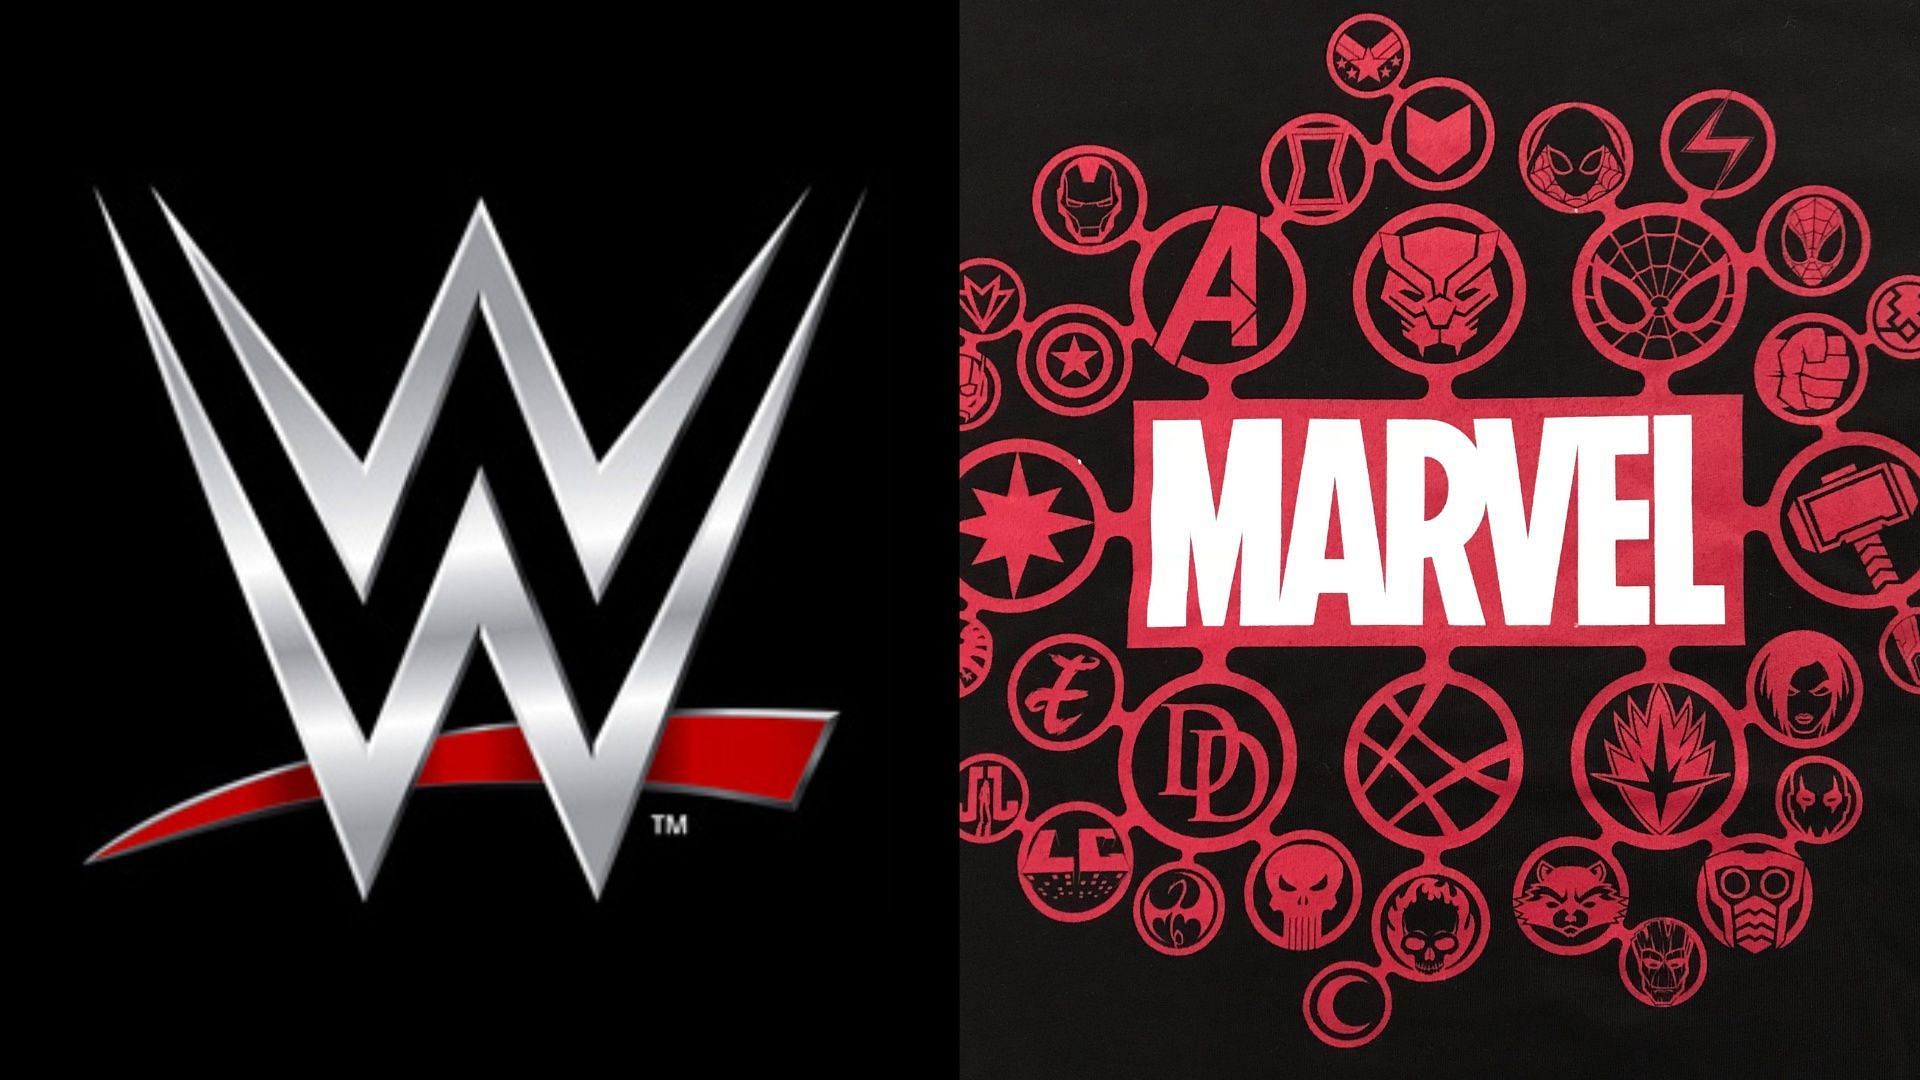 WWE has been part of pop culture like the Marvel Comics.